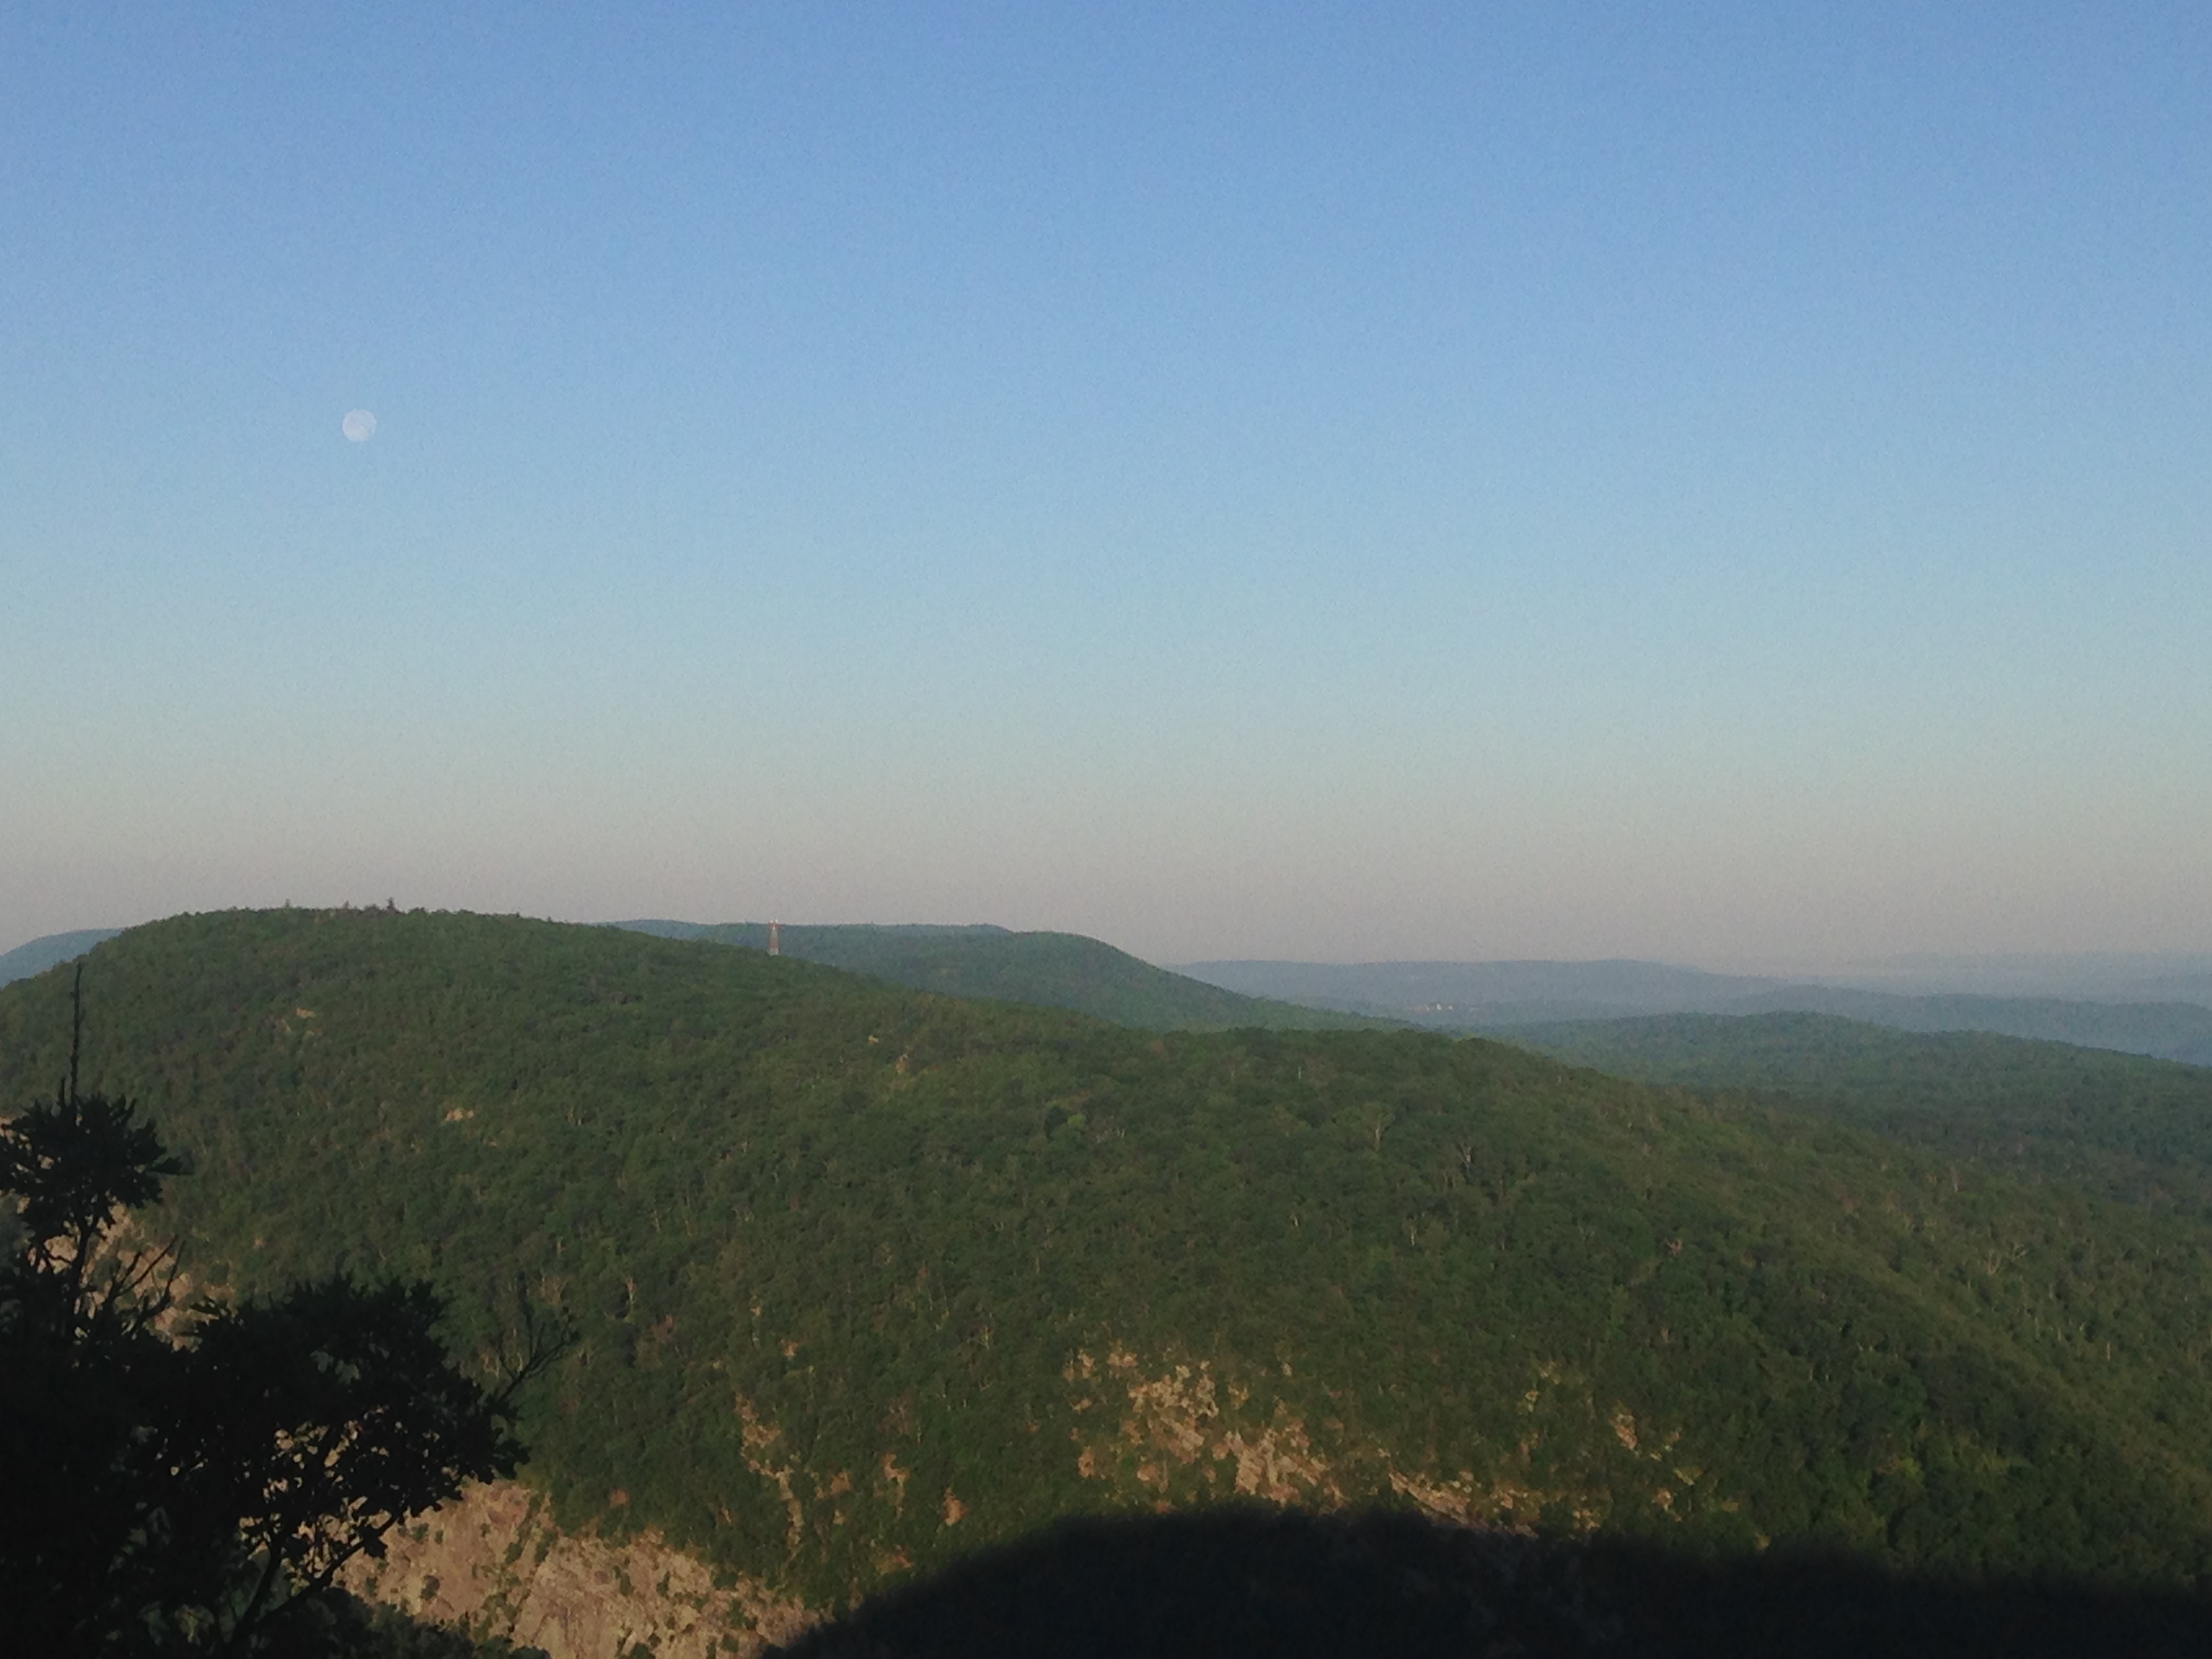 Moon and Belt of Venus over Mt. Minsi in the early morning